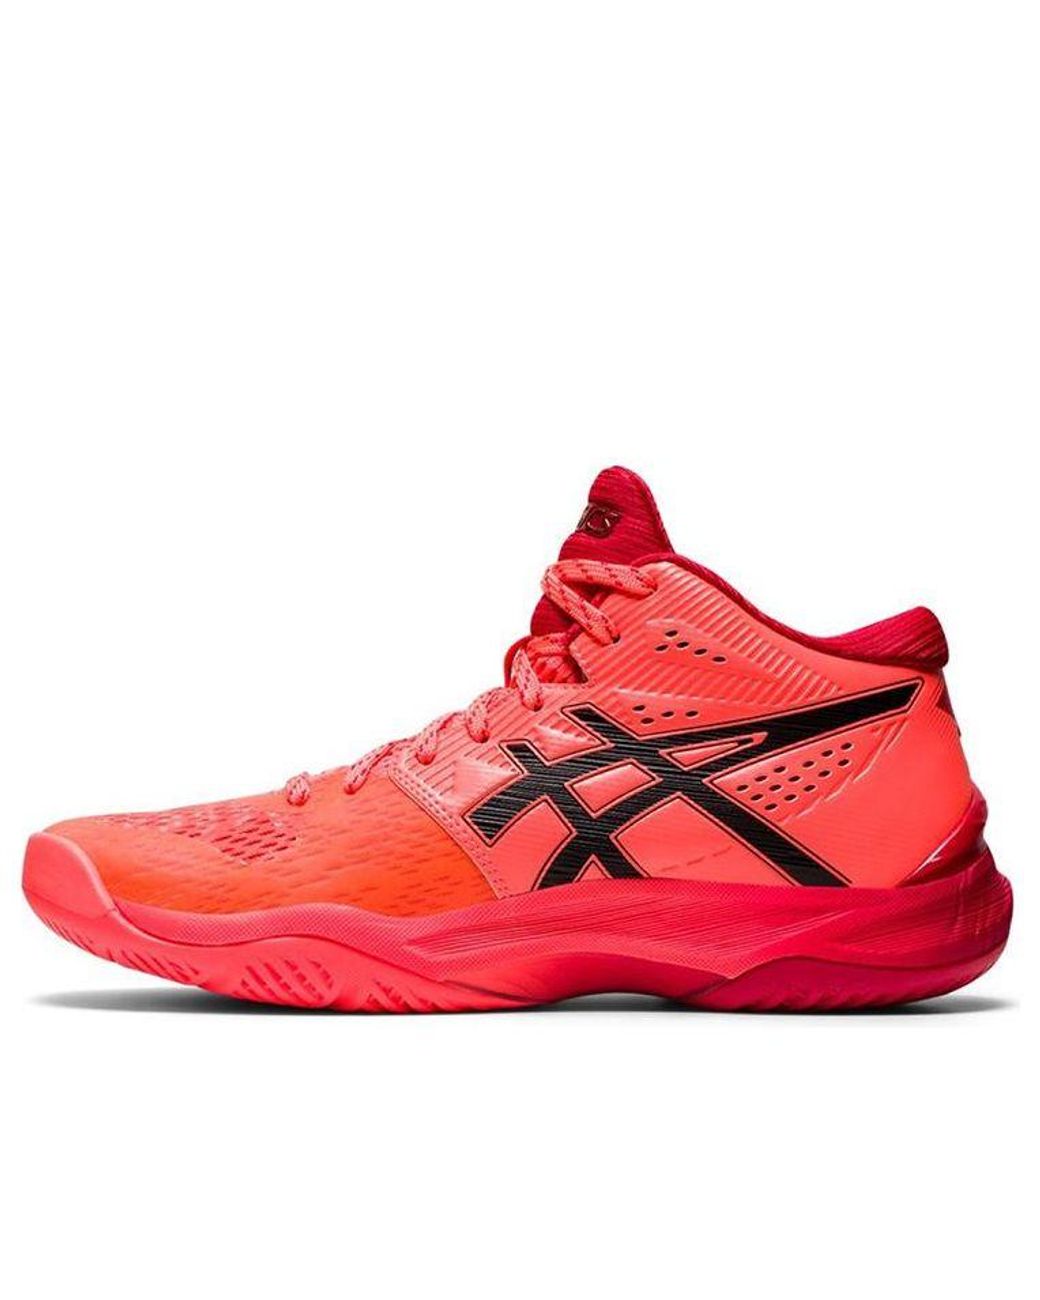 Asics Sky Elite Ff Mt Tokyo Comfortable Breathable Running Shoes in Red |  Lyst